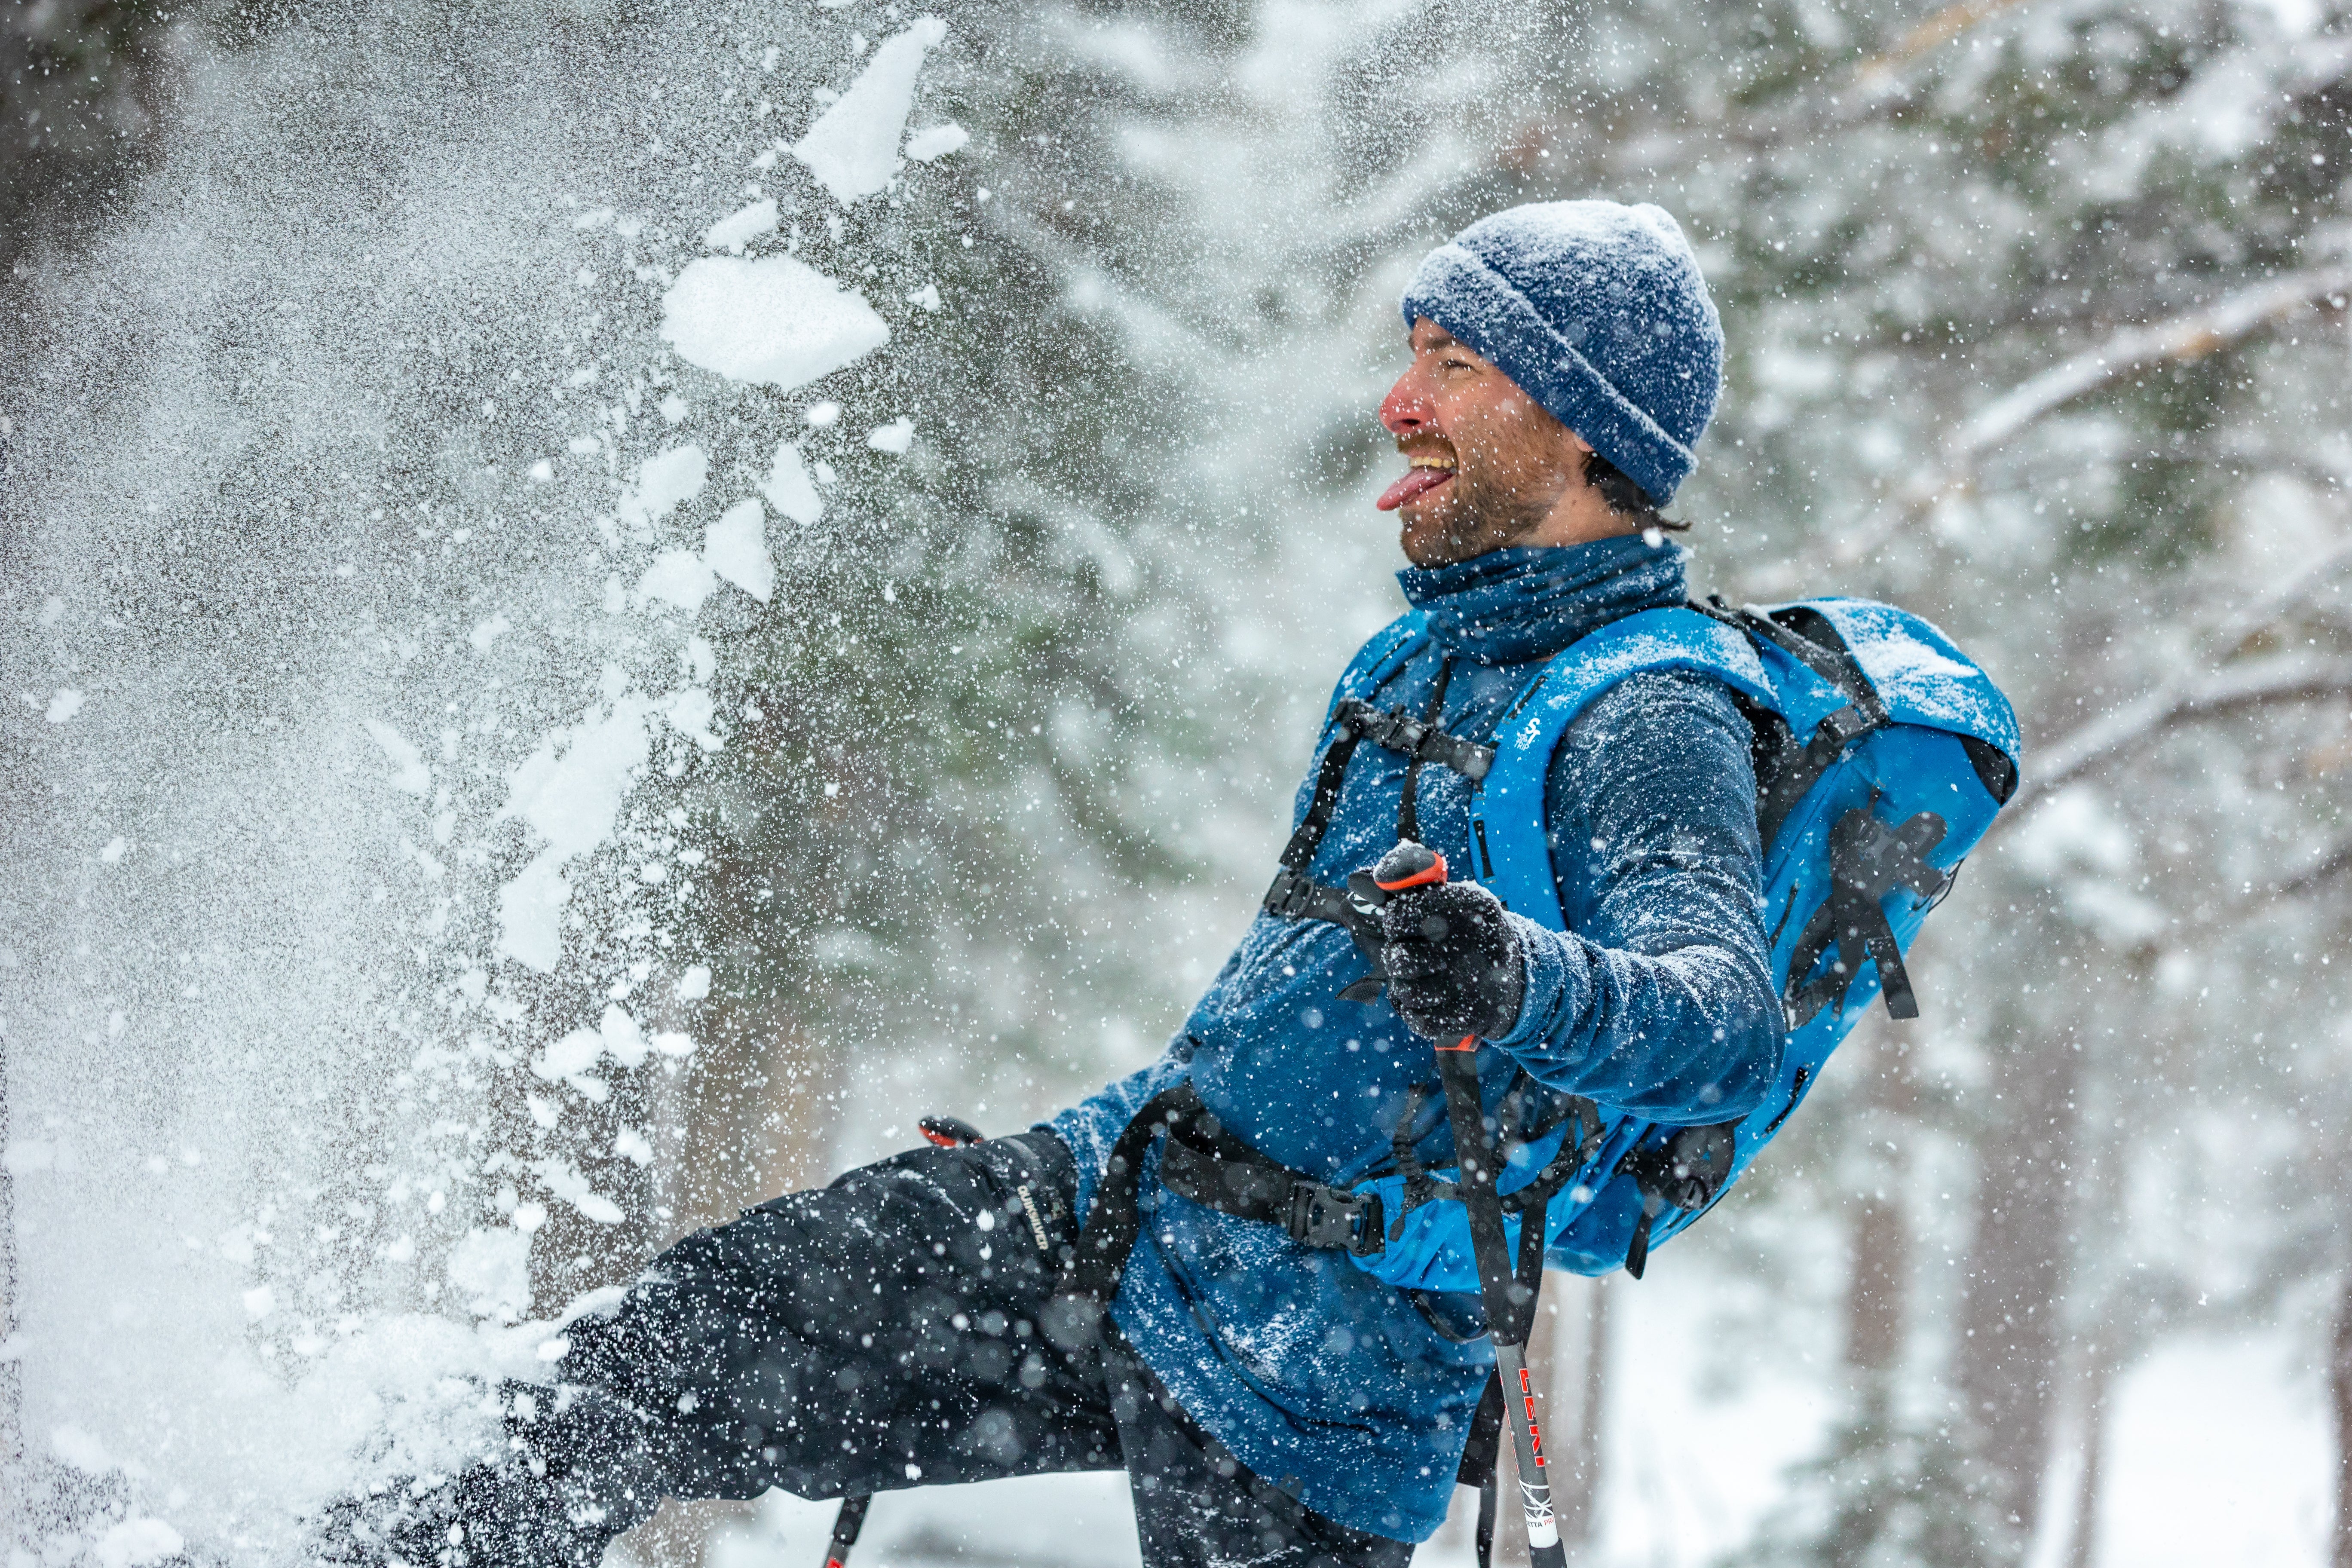 a man smiles kicking up snow while wearing blue Ridge Merino layers and a blue backpack